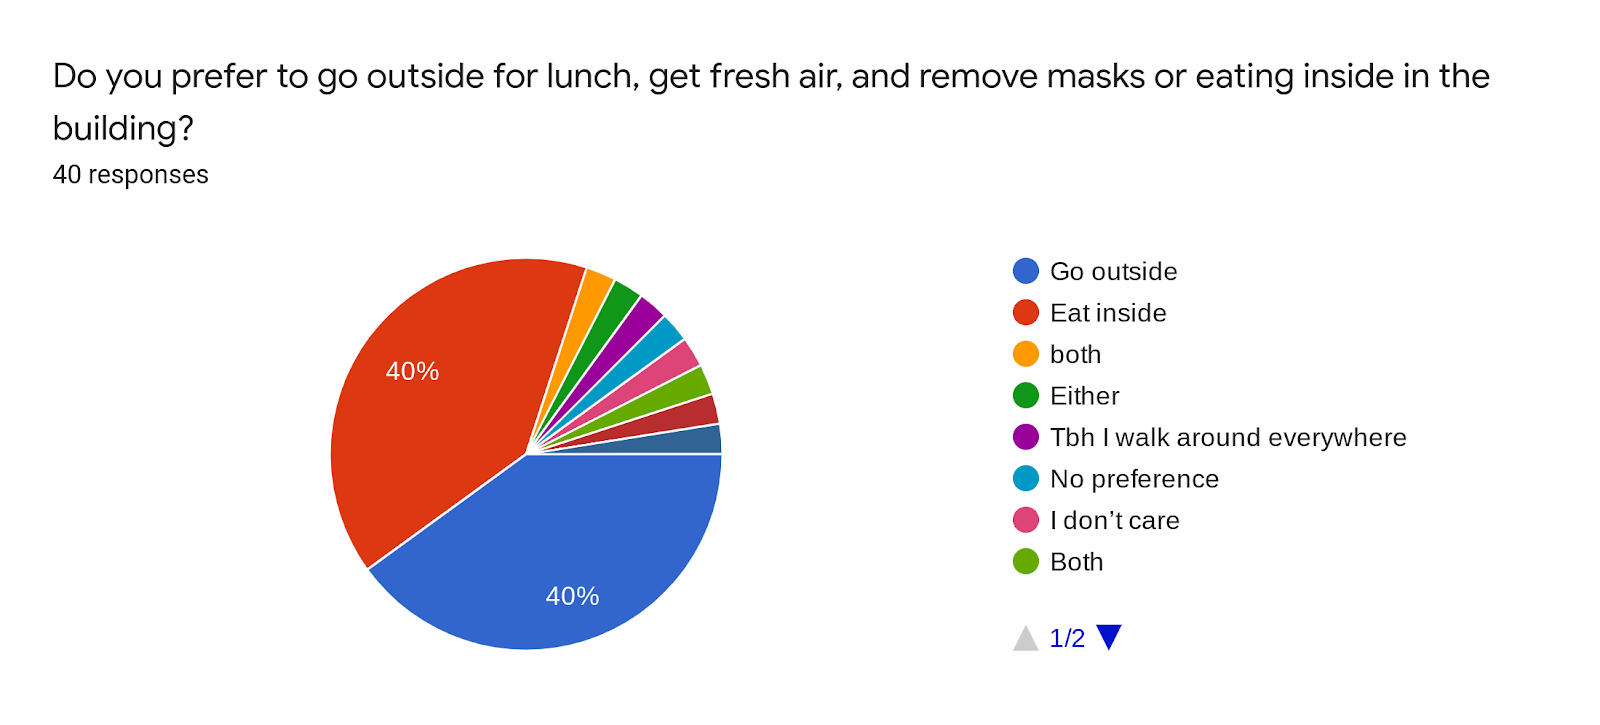 Forms response chart. Question title: Do you prefer to go outside for lunch, get fresh air, and remove masks or eating inside in the building?. Number of responses: 40 responses.